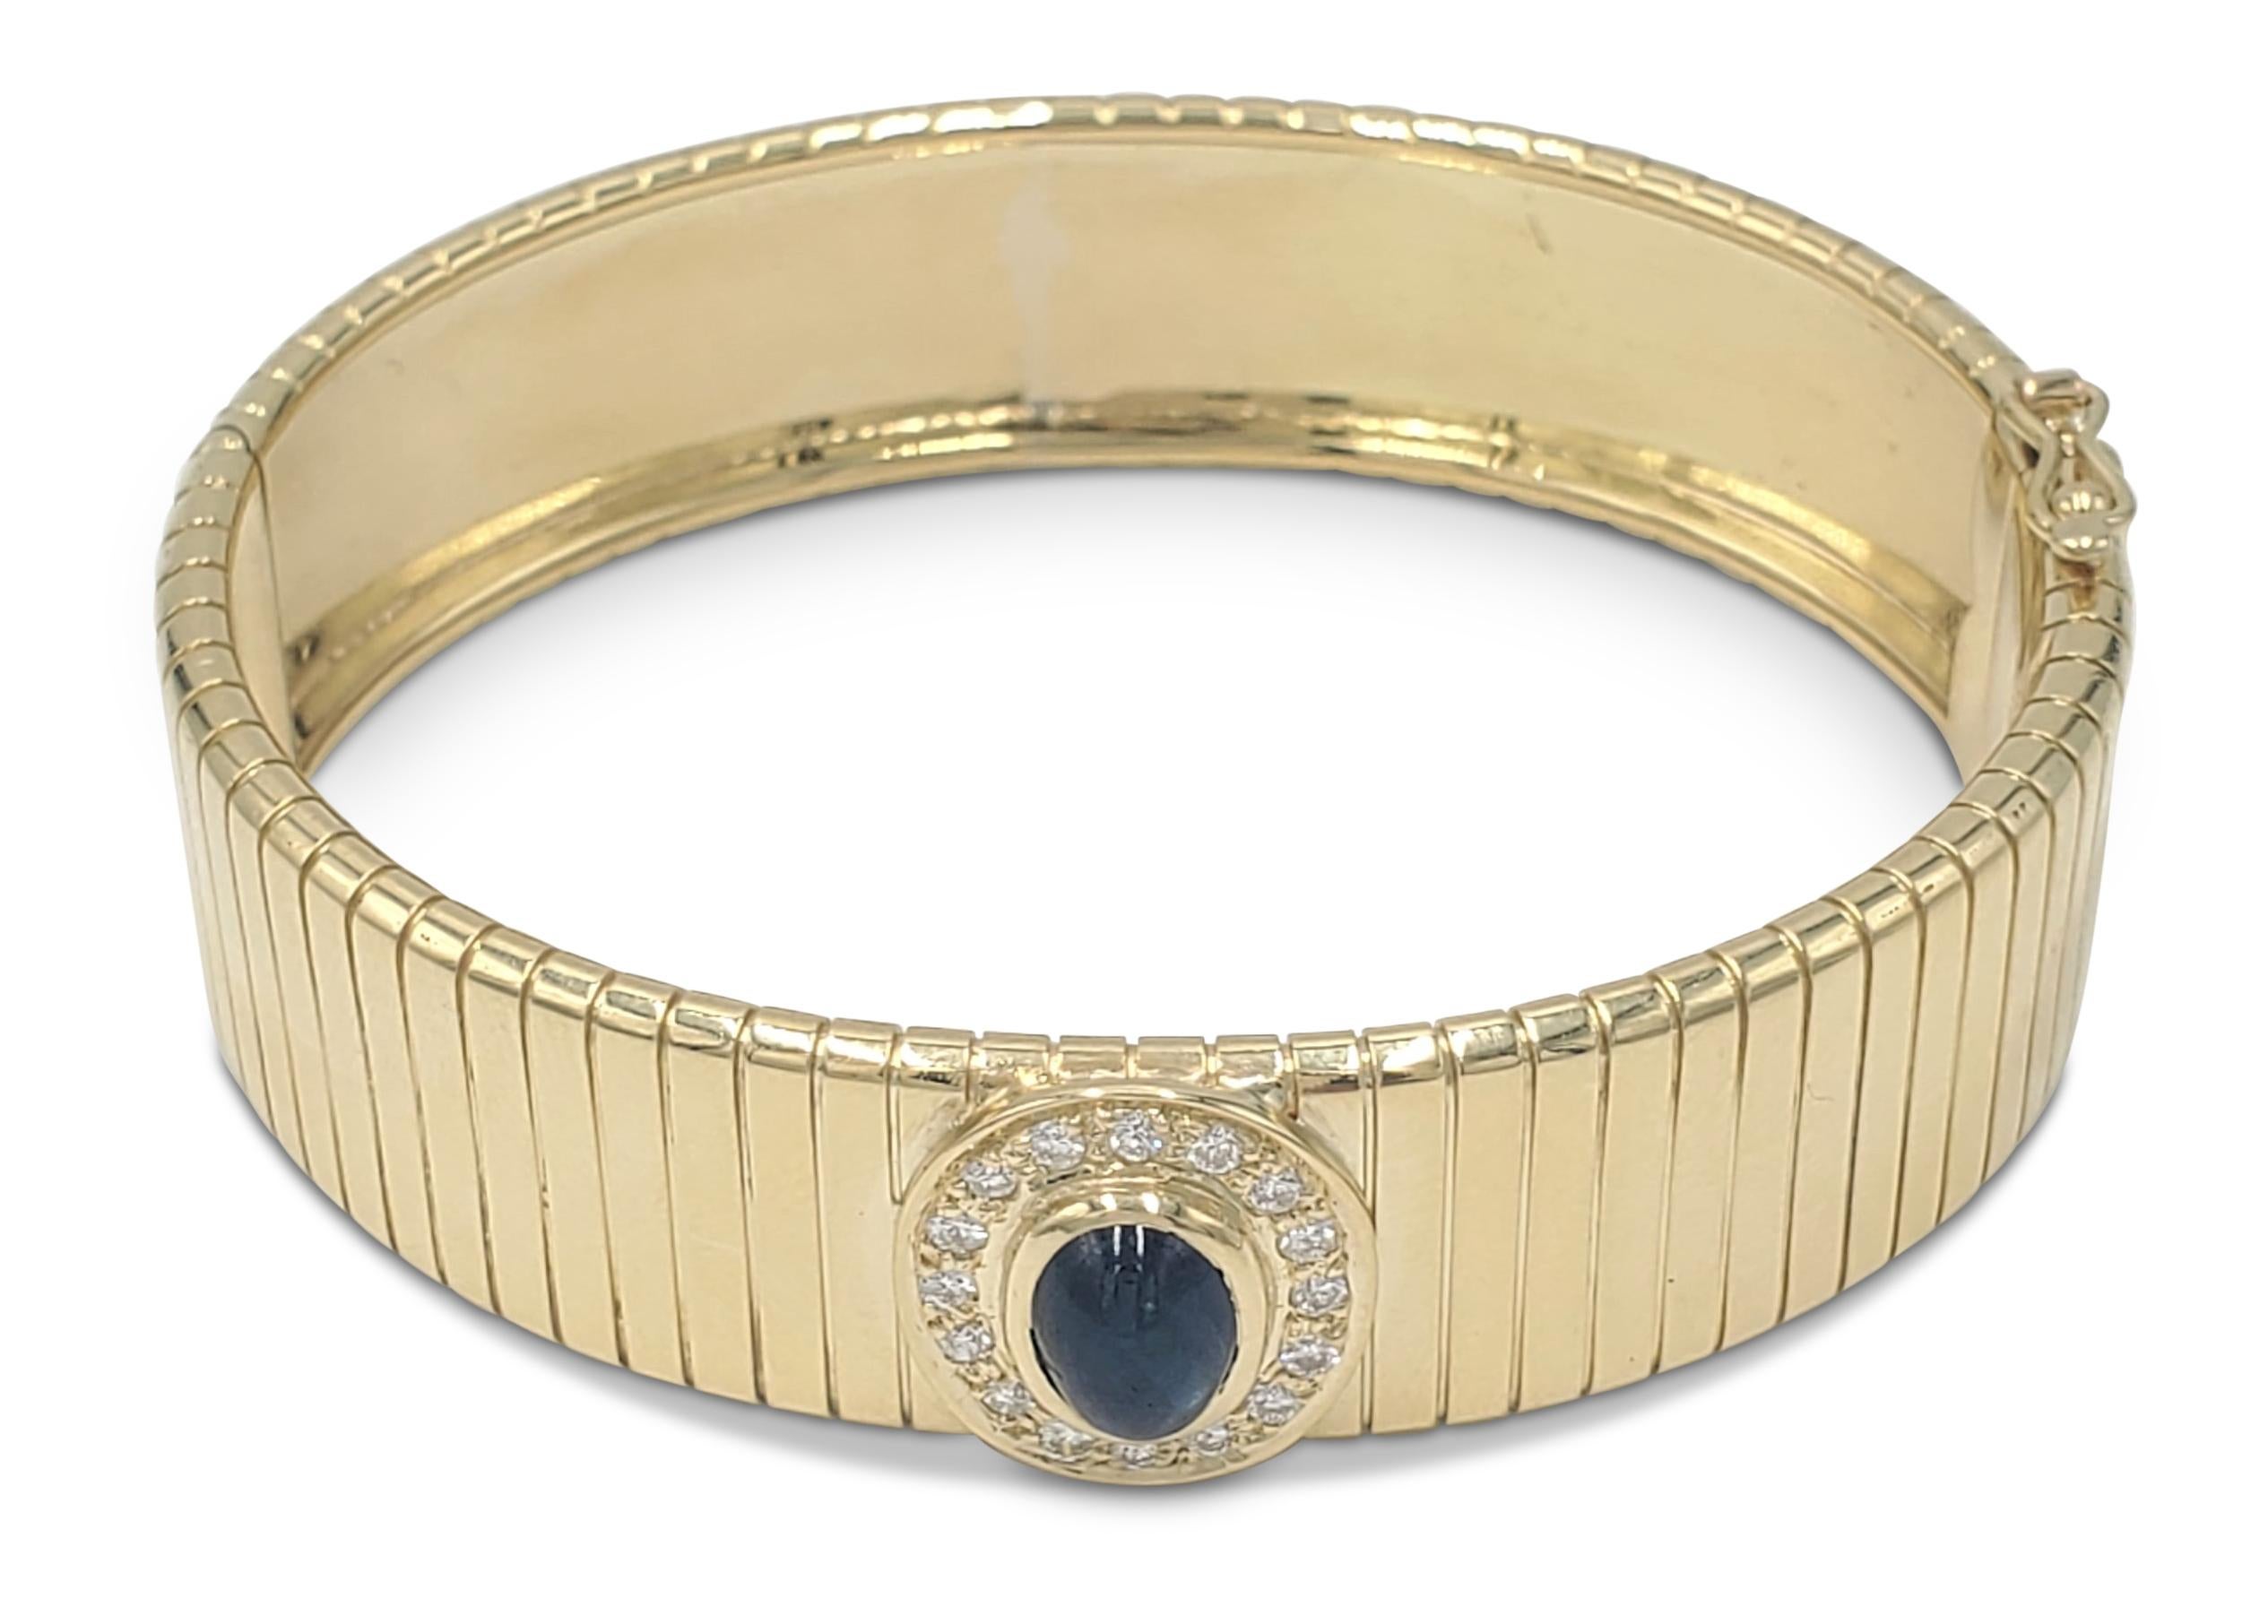 An 18 karat yellow gold bangle centering on one blue sapphire weighing an estimated 1.60 carats surrounded by round brilliant cut diamonds (0.16cttw). Signed Soler Cabot, Faberge. Bangle is not presented with original box or papers. 6 inches in